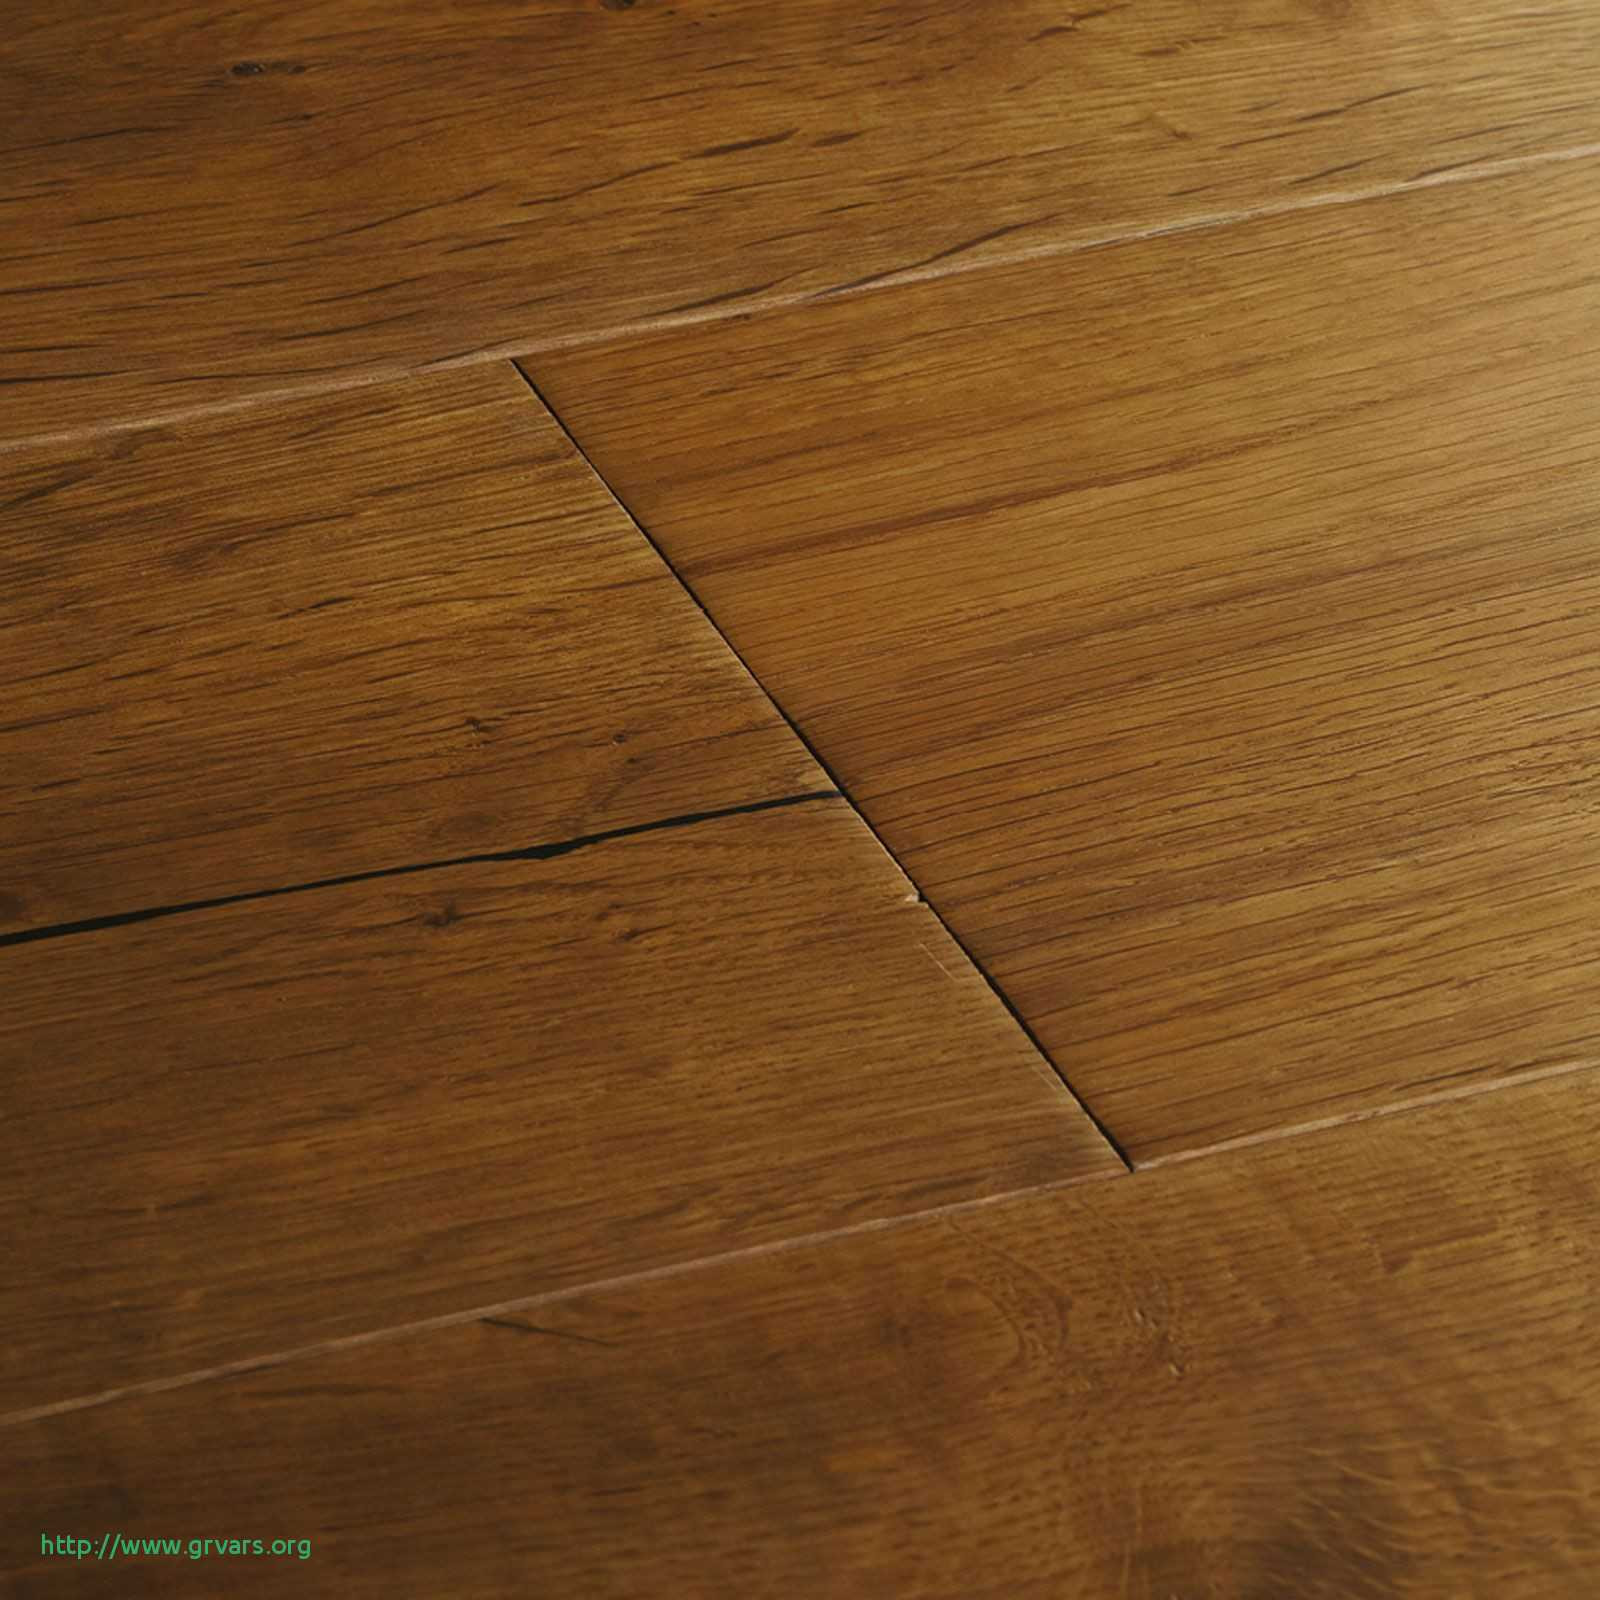 21 Elegant Can You Lay Hardwood Floors Over Tile 2024 free download can you lay hardwood floors over tile of 22 impressionnant can laminate flooring be laid over tiles ideas blog with can laminate flooring be laid over tiles charmant laying laminate flooring